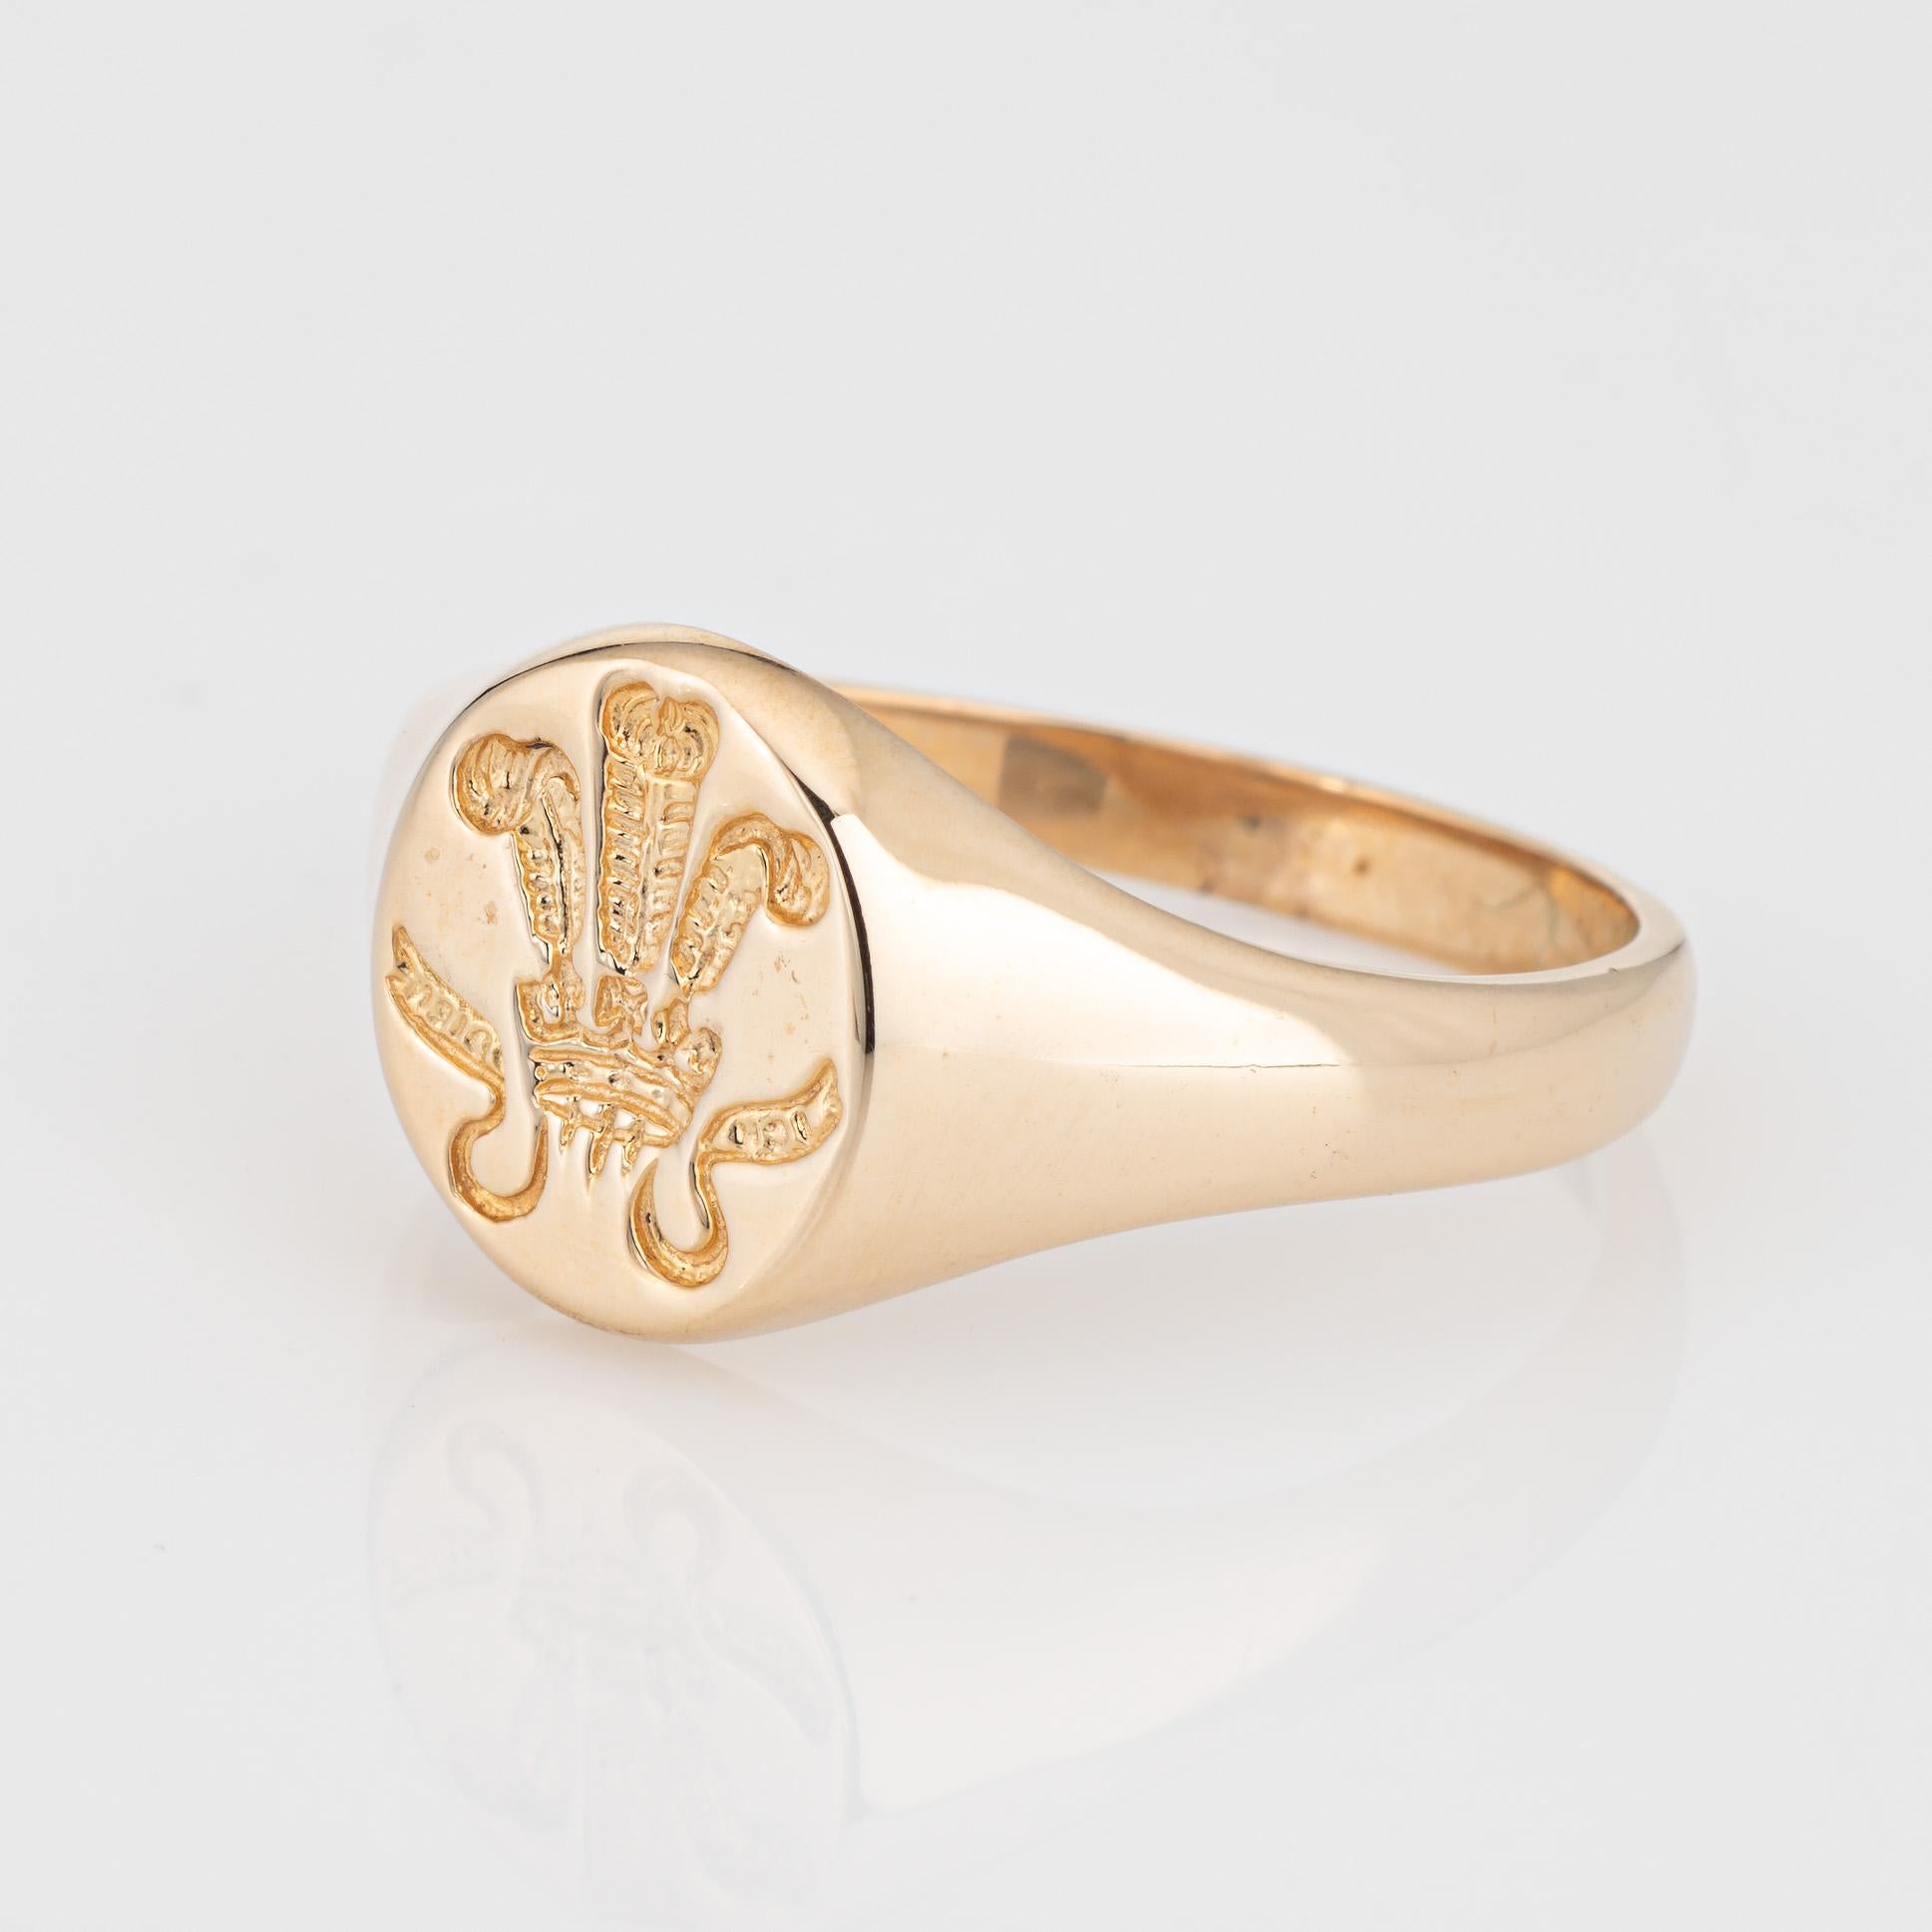 Prince of Wales Feathers Signet Ring Vinatge 9k Yellow Gold Men's Sz 12.5  In Good Condition For Sale In Torrance, CA